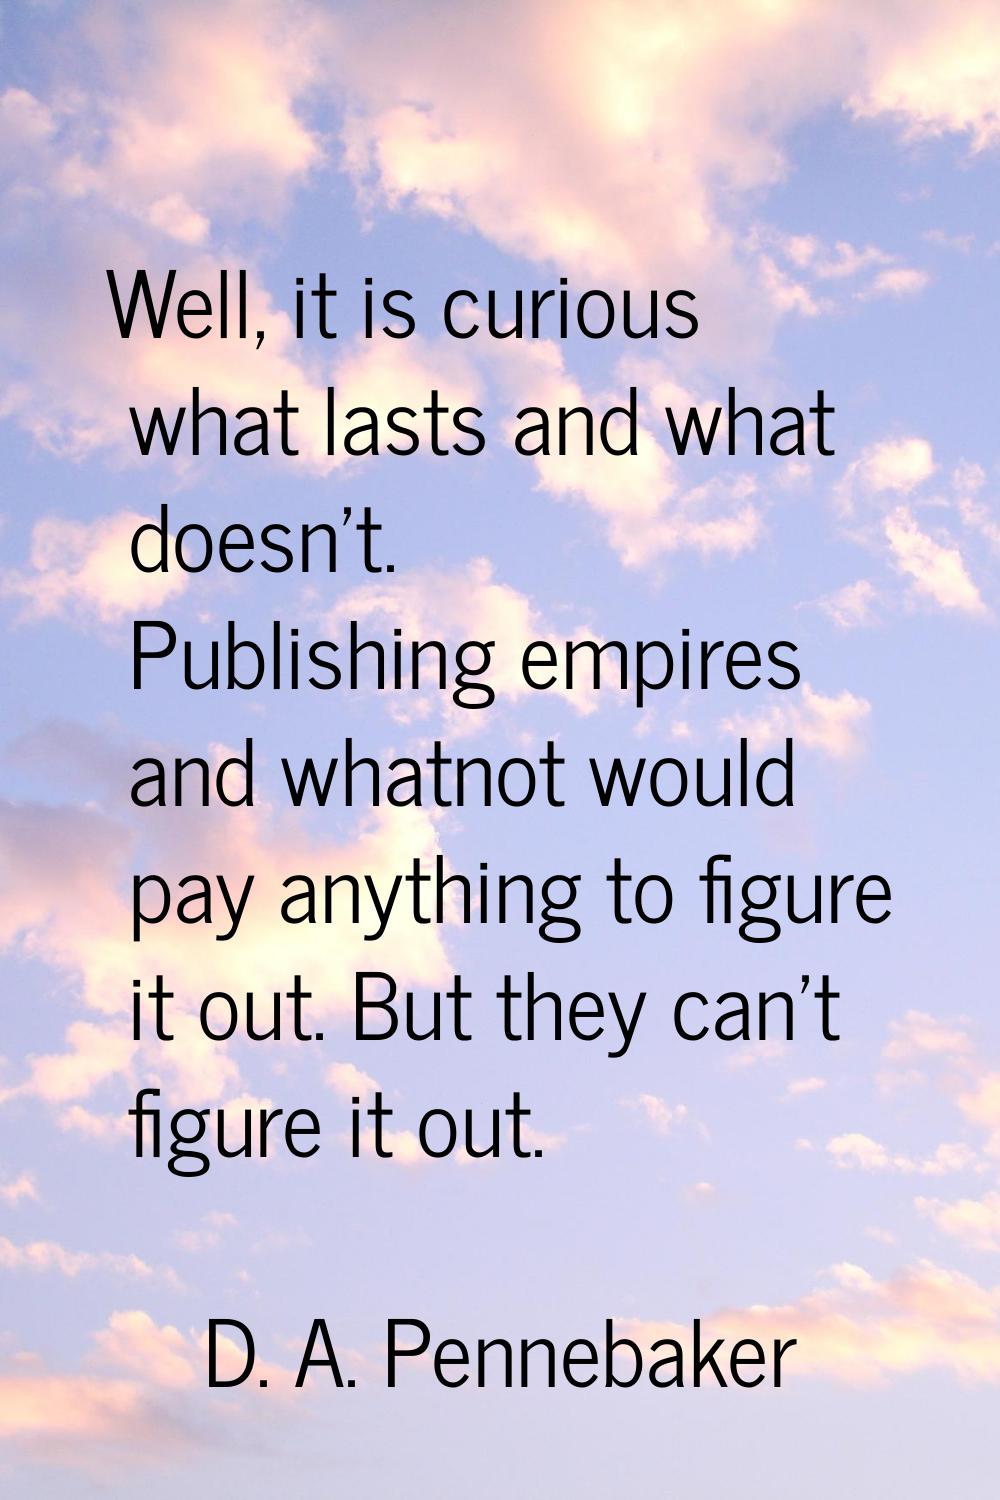 Well, it is curious what lasts and what doesn't. Publishing empires and whatnot would pay anything 